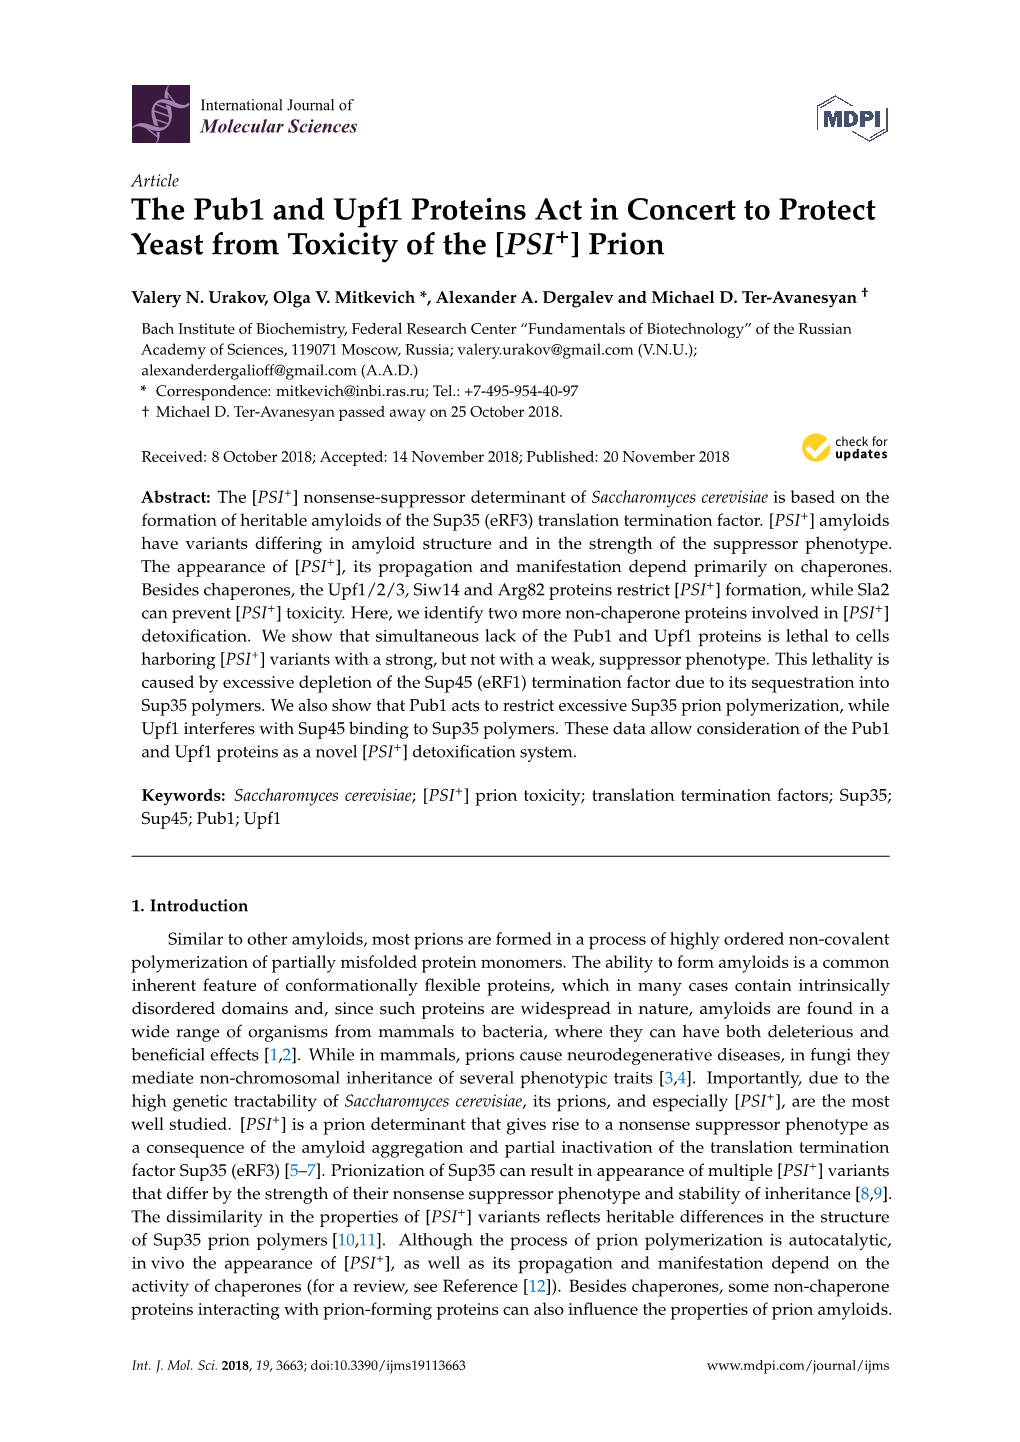 The Pub1 and Upf1 Proteins Act in Concert to Protect Yeast from Toxicity of the [PSI+] Prion